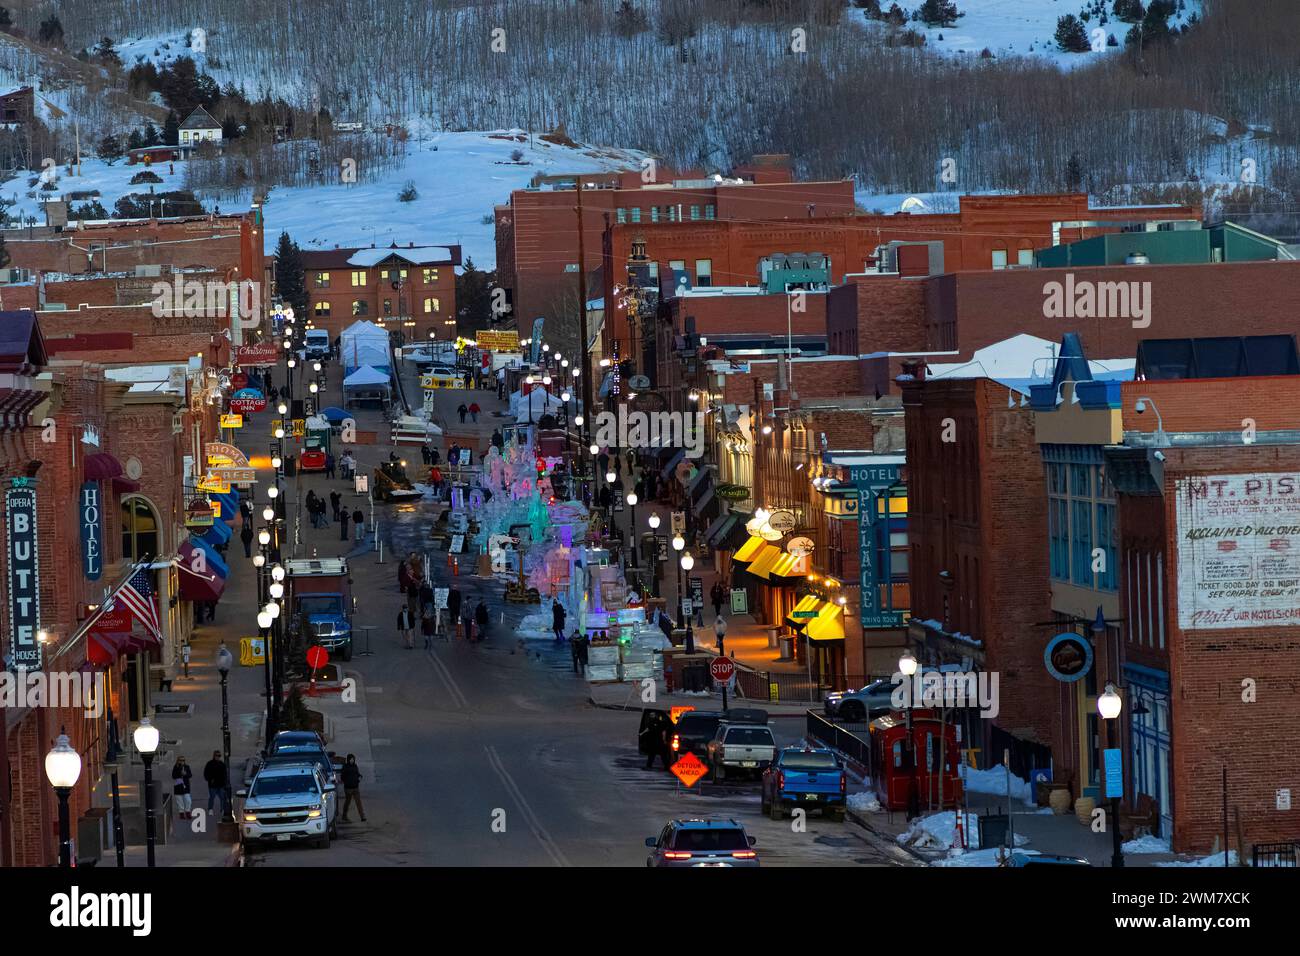 Ice sculptures at the Cripple Creek Ice Festival Stock Photo